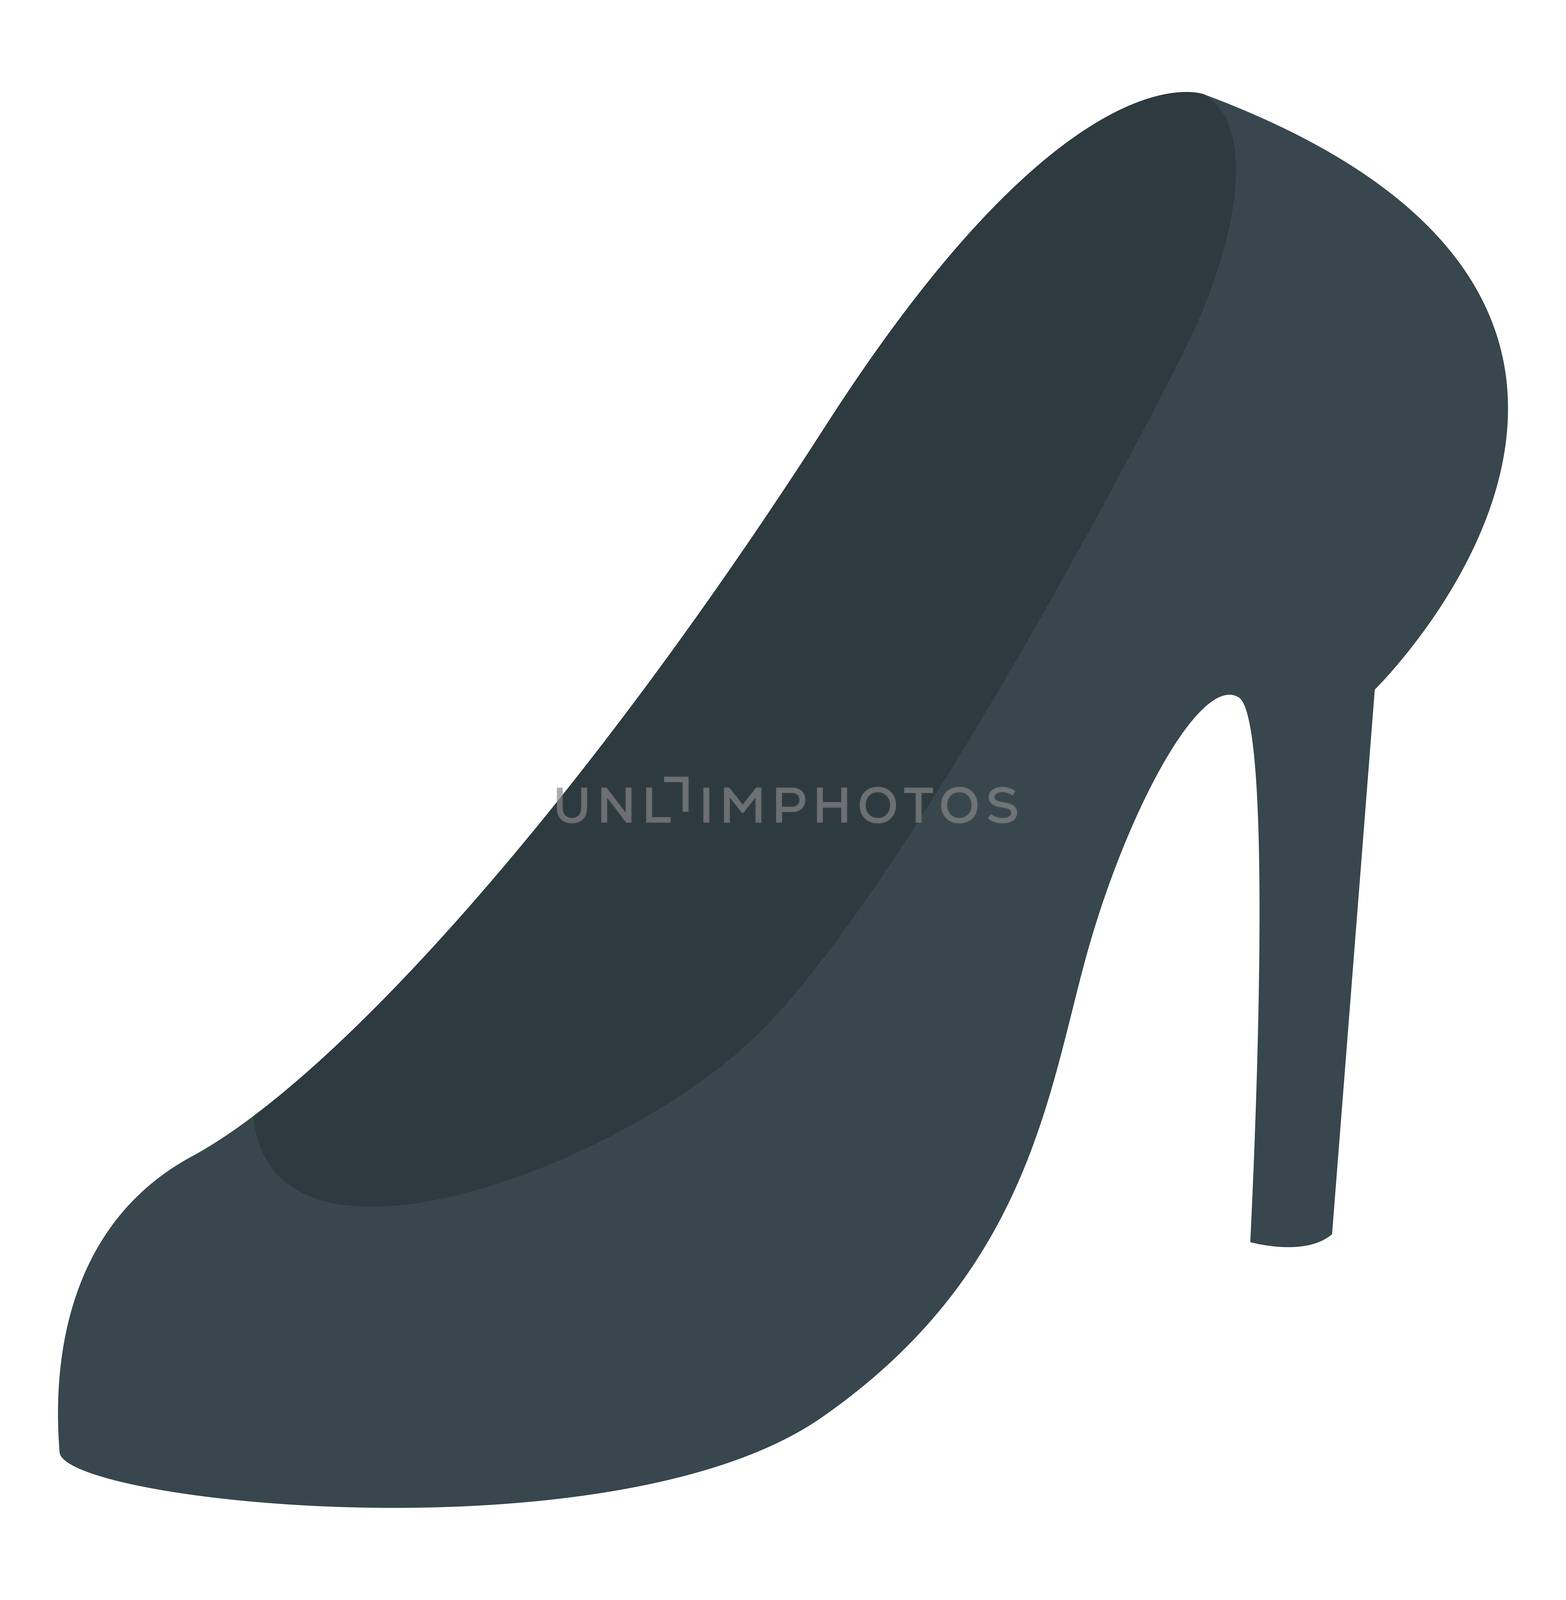 Woman heels, illustration, vector on white background